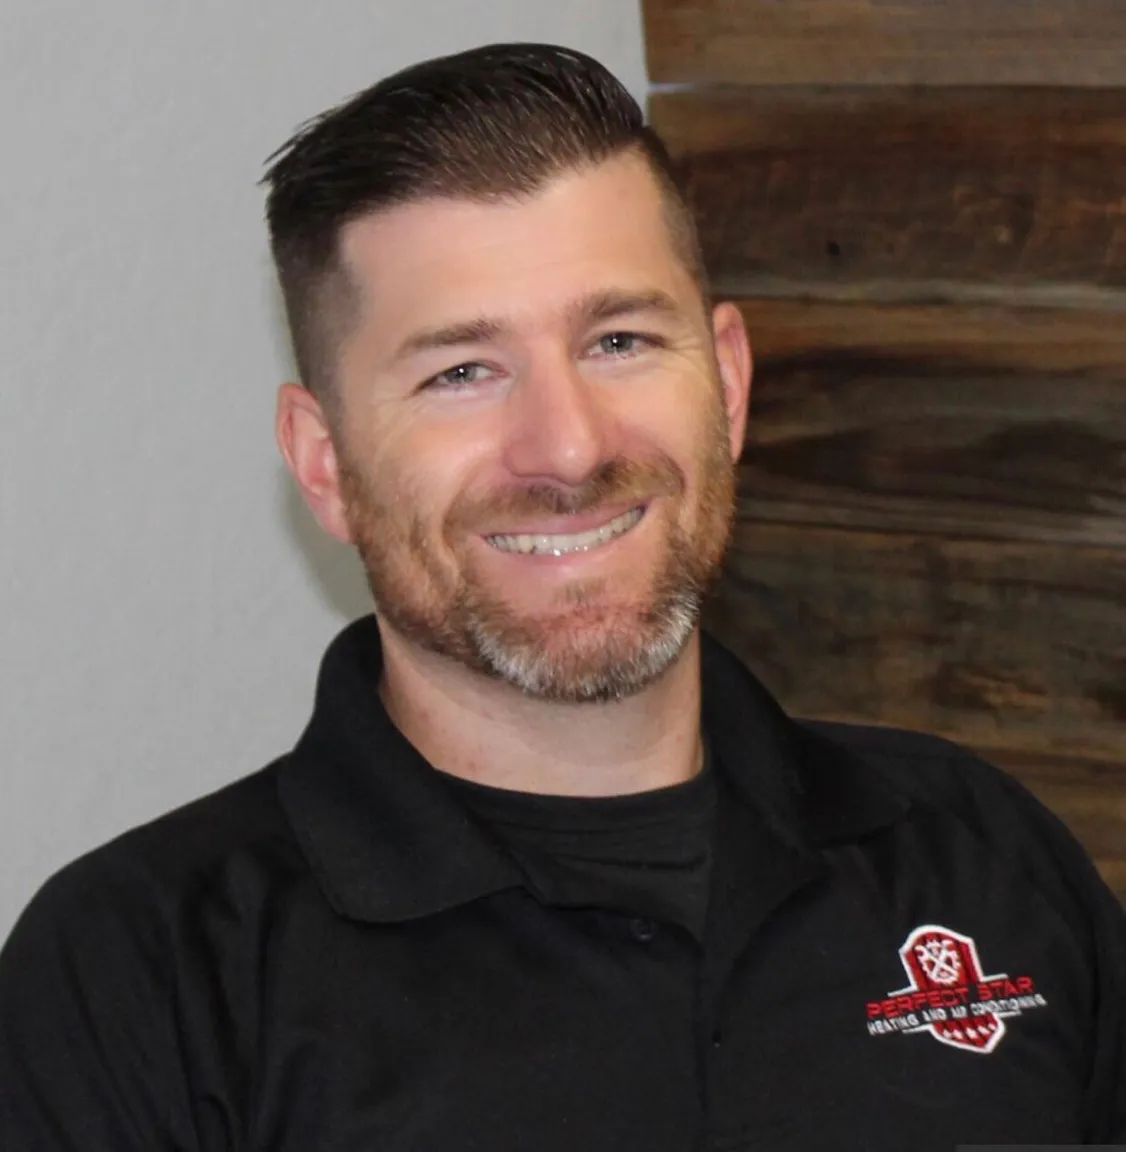 Chris Donzelli is owner of Perfect Star Heating and Air Conditioning, a Diamond Certified company. He can be reached at (510) 244-4356 or by email.